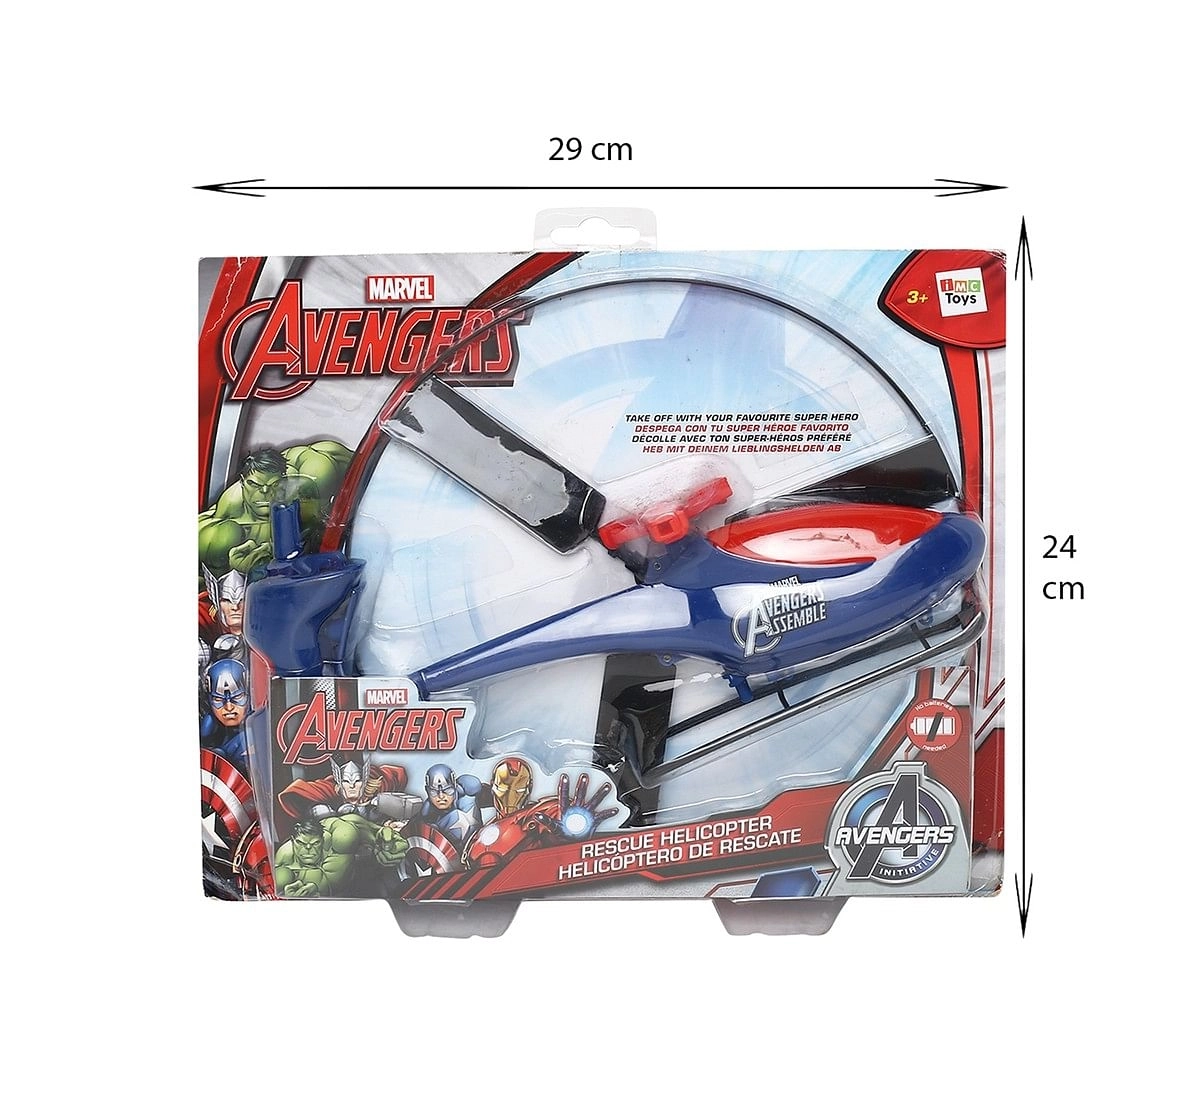 Marvel Avengers Rescue Helicopter Vehicles for Kids age 3Y+ 